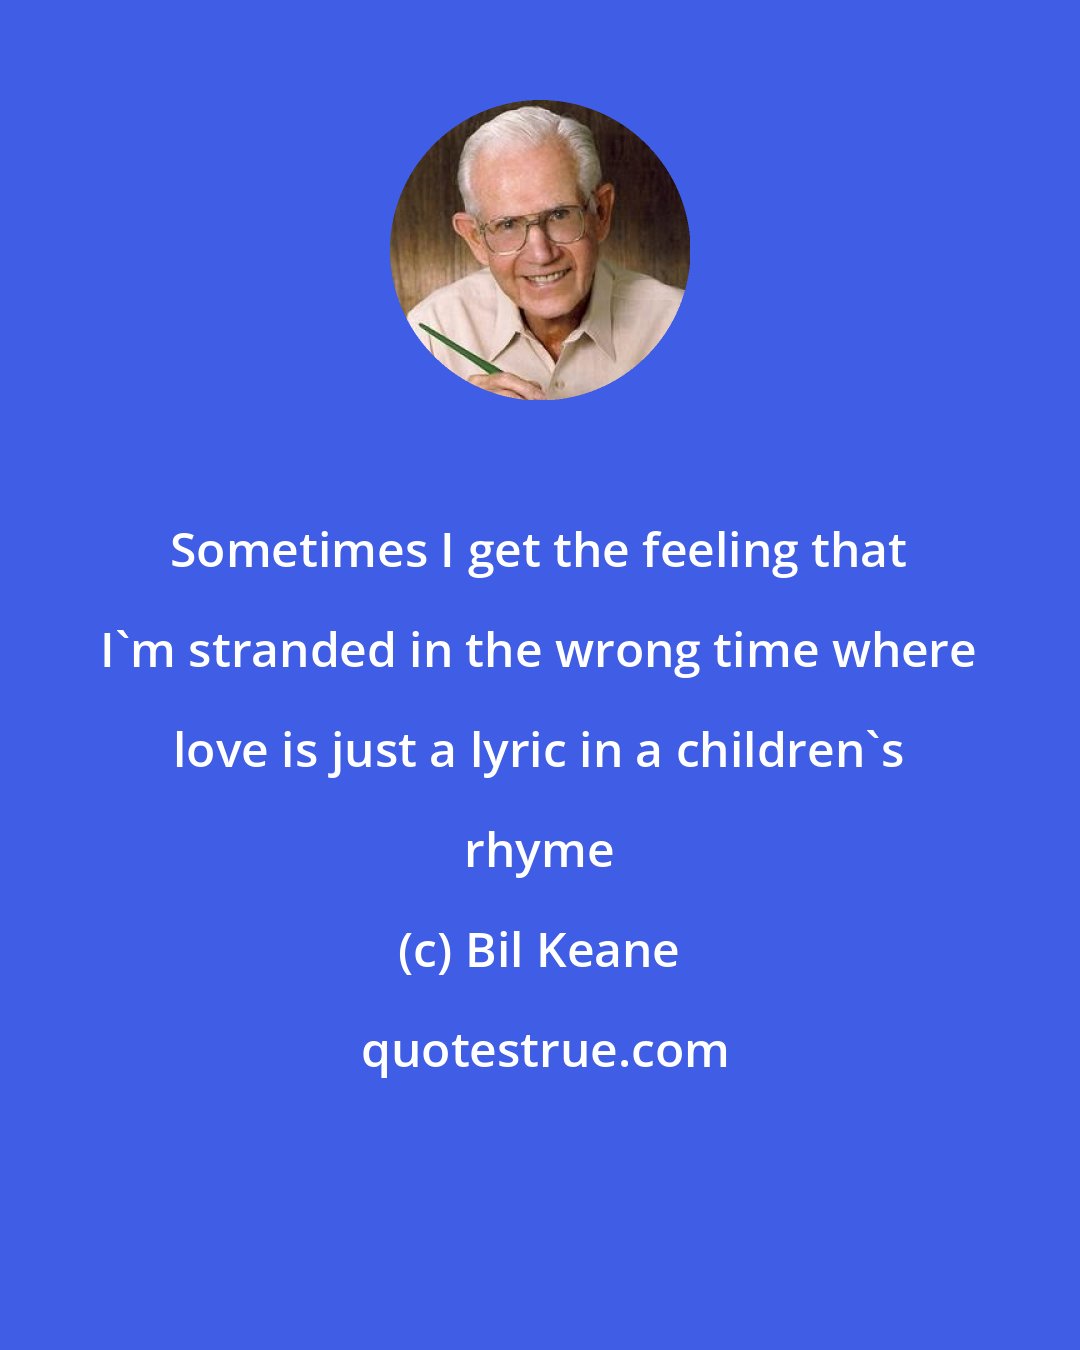 Bil Keane: Sometimes I get the feeling that I'm stranded in the wrong time where love is just a lyric in a children's rhyme